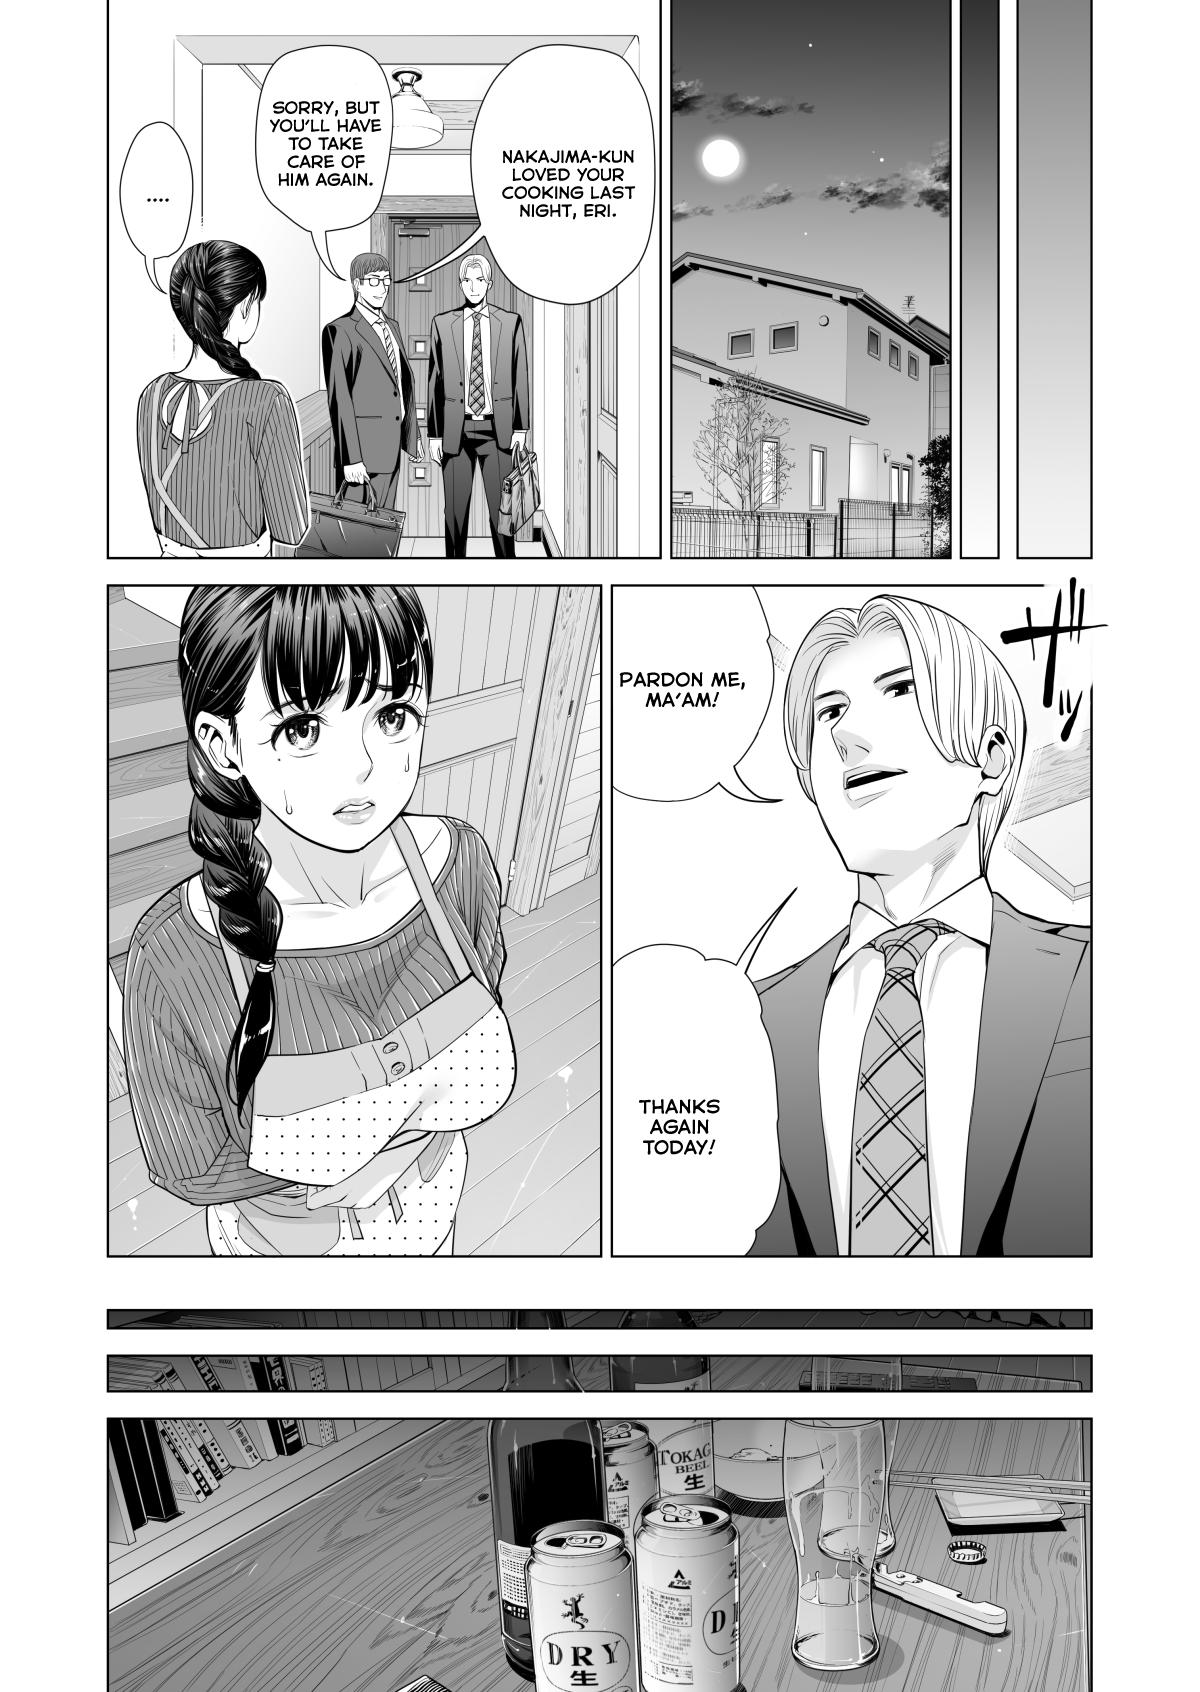 [HGT Lab (Tsusauto)] Tsukiyo no Midare Zake (Kouhen) Moonlit Intoxication ~ A Housewife Stolen by a Coworker Besides her Blackout Drunk Husband ~ Chapter 2 [English] 9